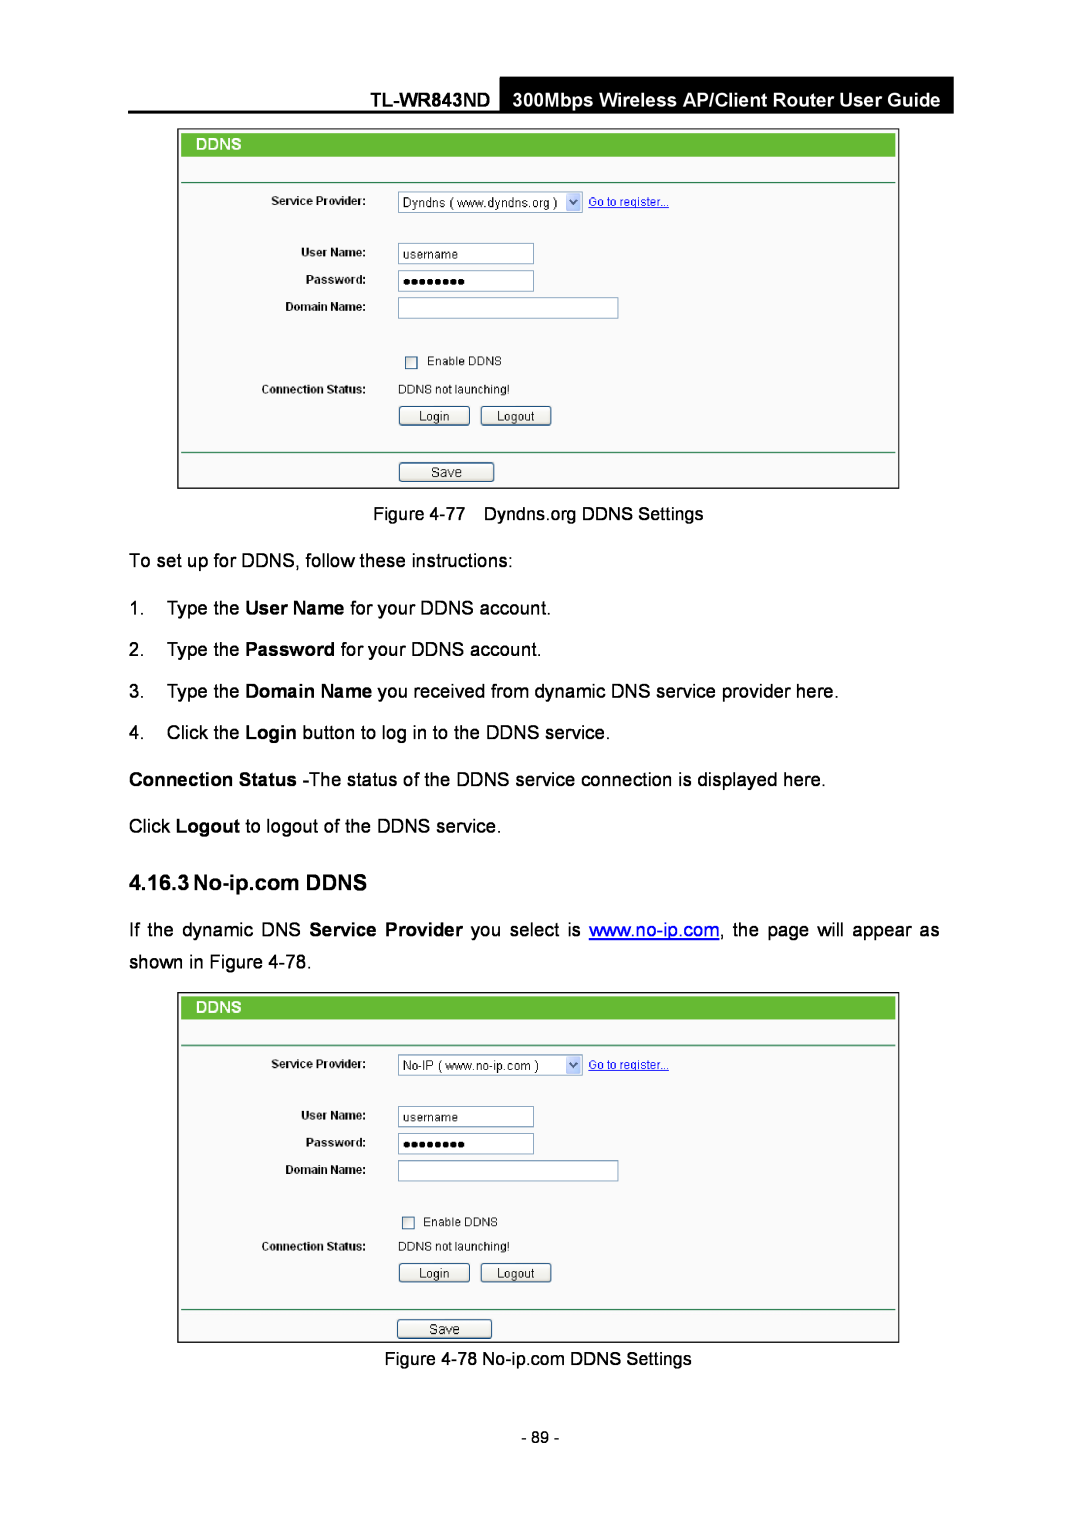 TP-Link manual No-ip.com DDNS, TL-WR843ND 300Mbps Wireless AP/Client Router User Guide, 77 Dyndns.org DDNS Settings 